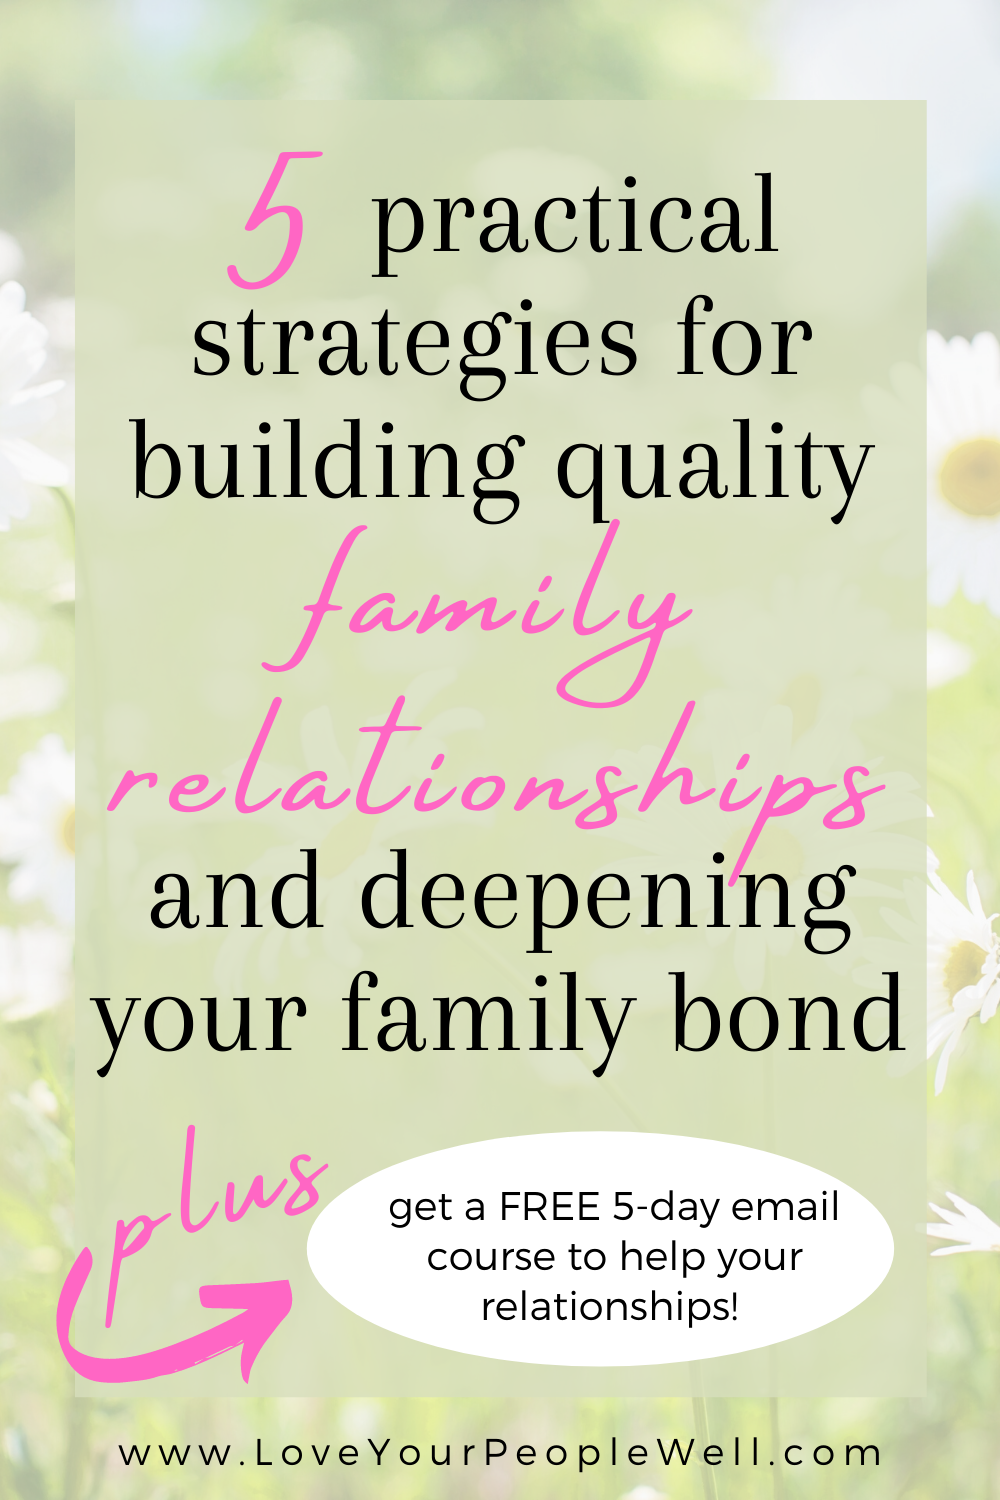 5 practical strategies for building quality family relationships and deepening your family bond // Episode 8